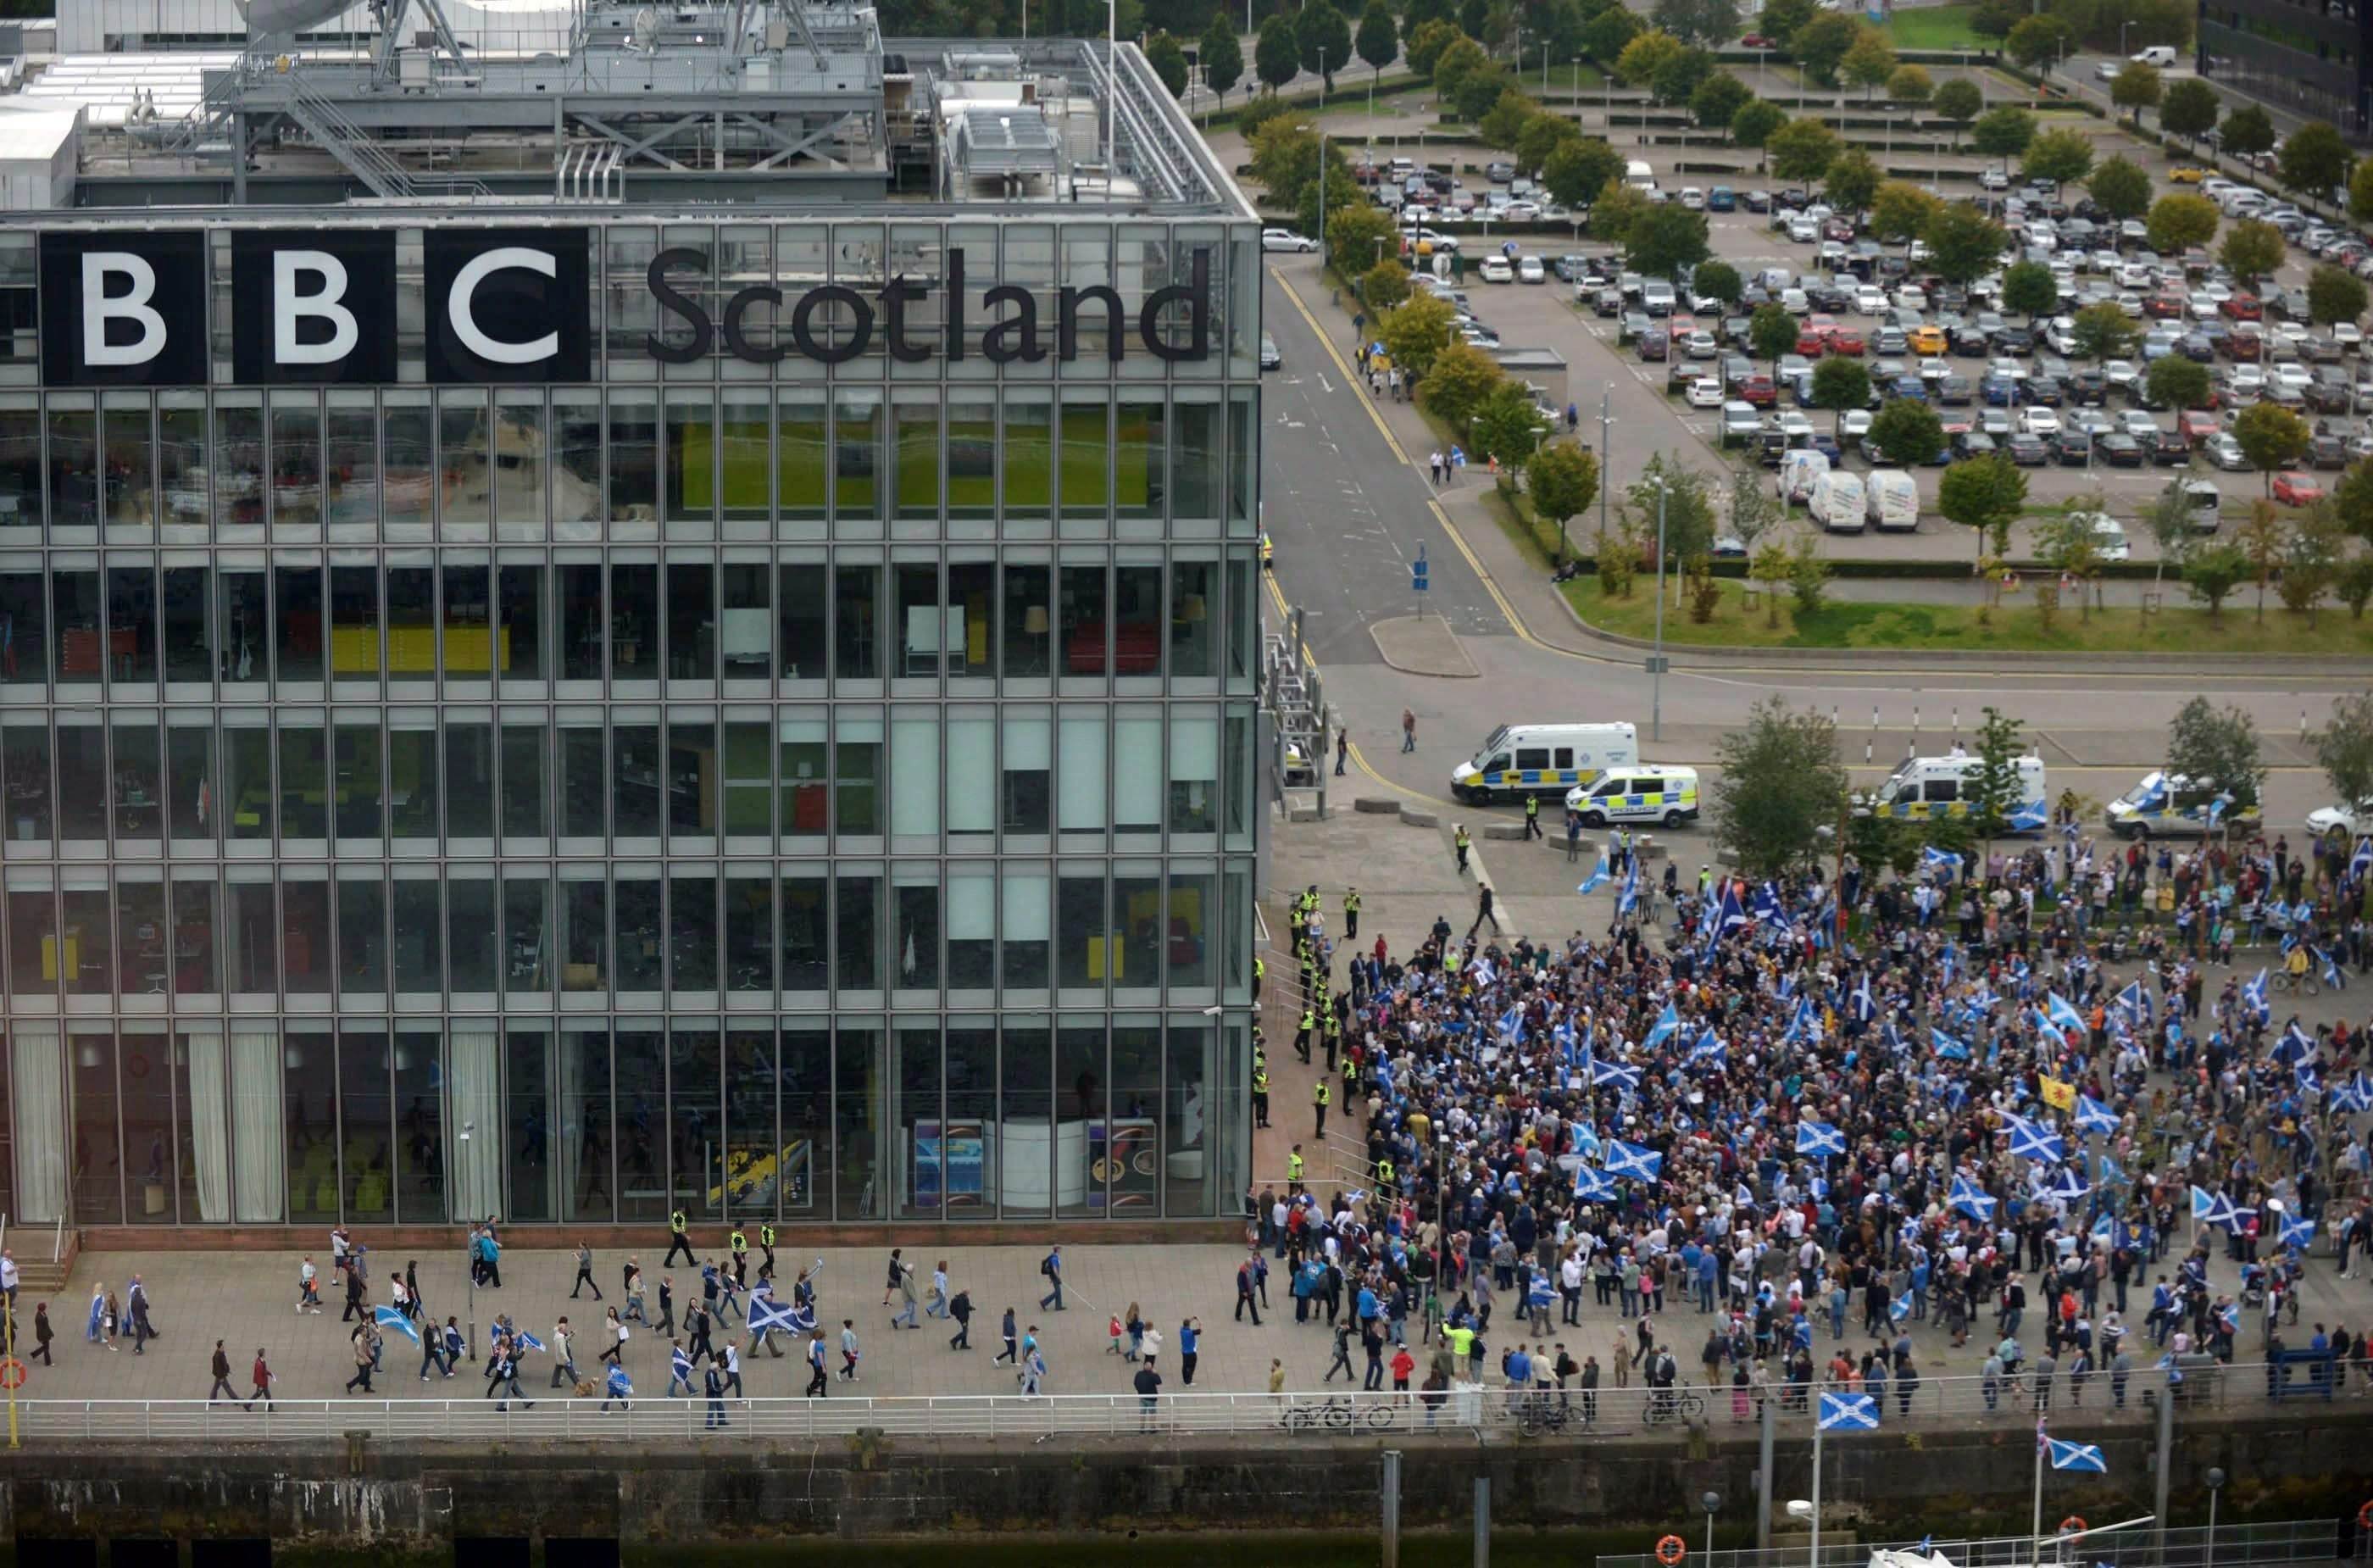 September 2014: Thousands of protesters outside BBC Scotland complaining of biased against the BBC over its coverage of the independence referendum.  